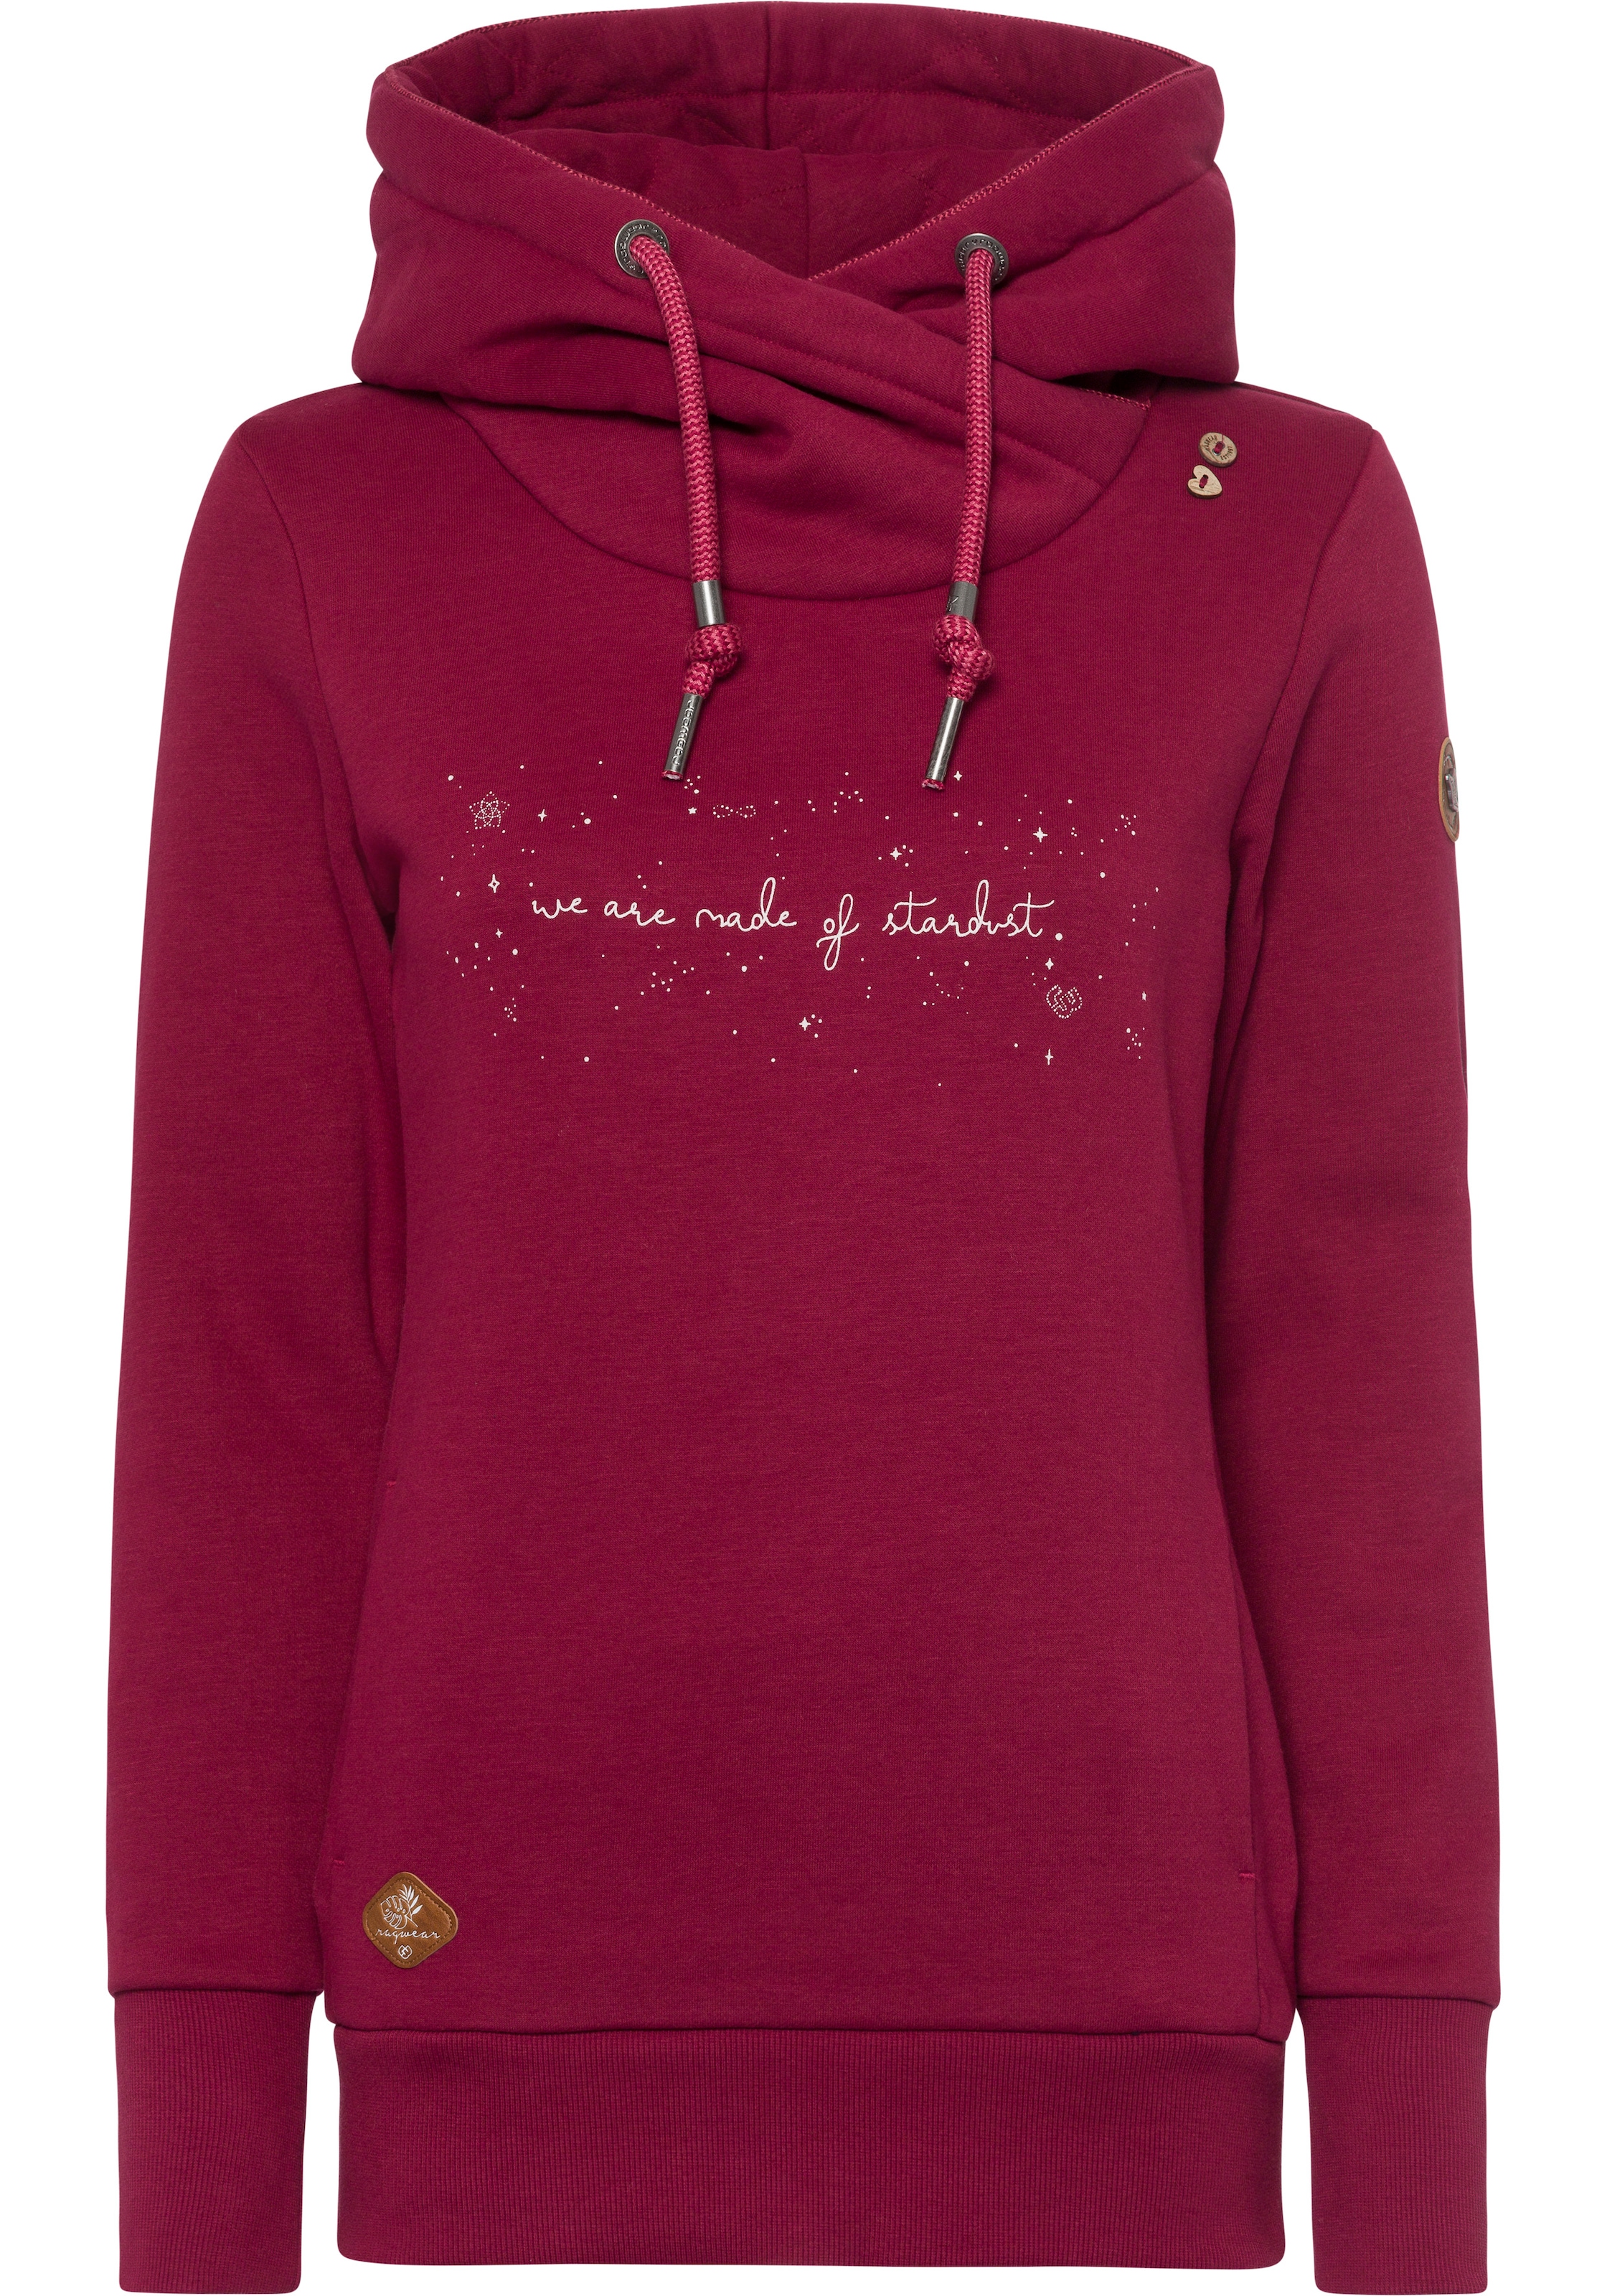 Ragwear Sweater »GRIPY BUTTON O STARDUST«, mit Statement-Front-Print "We are made of Stardust"